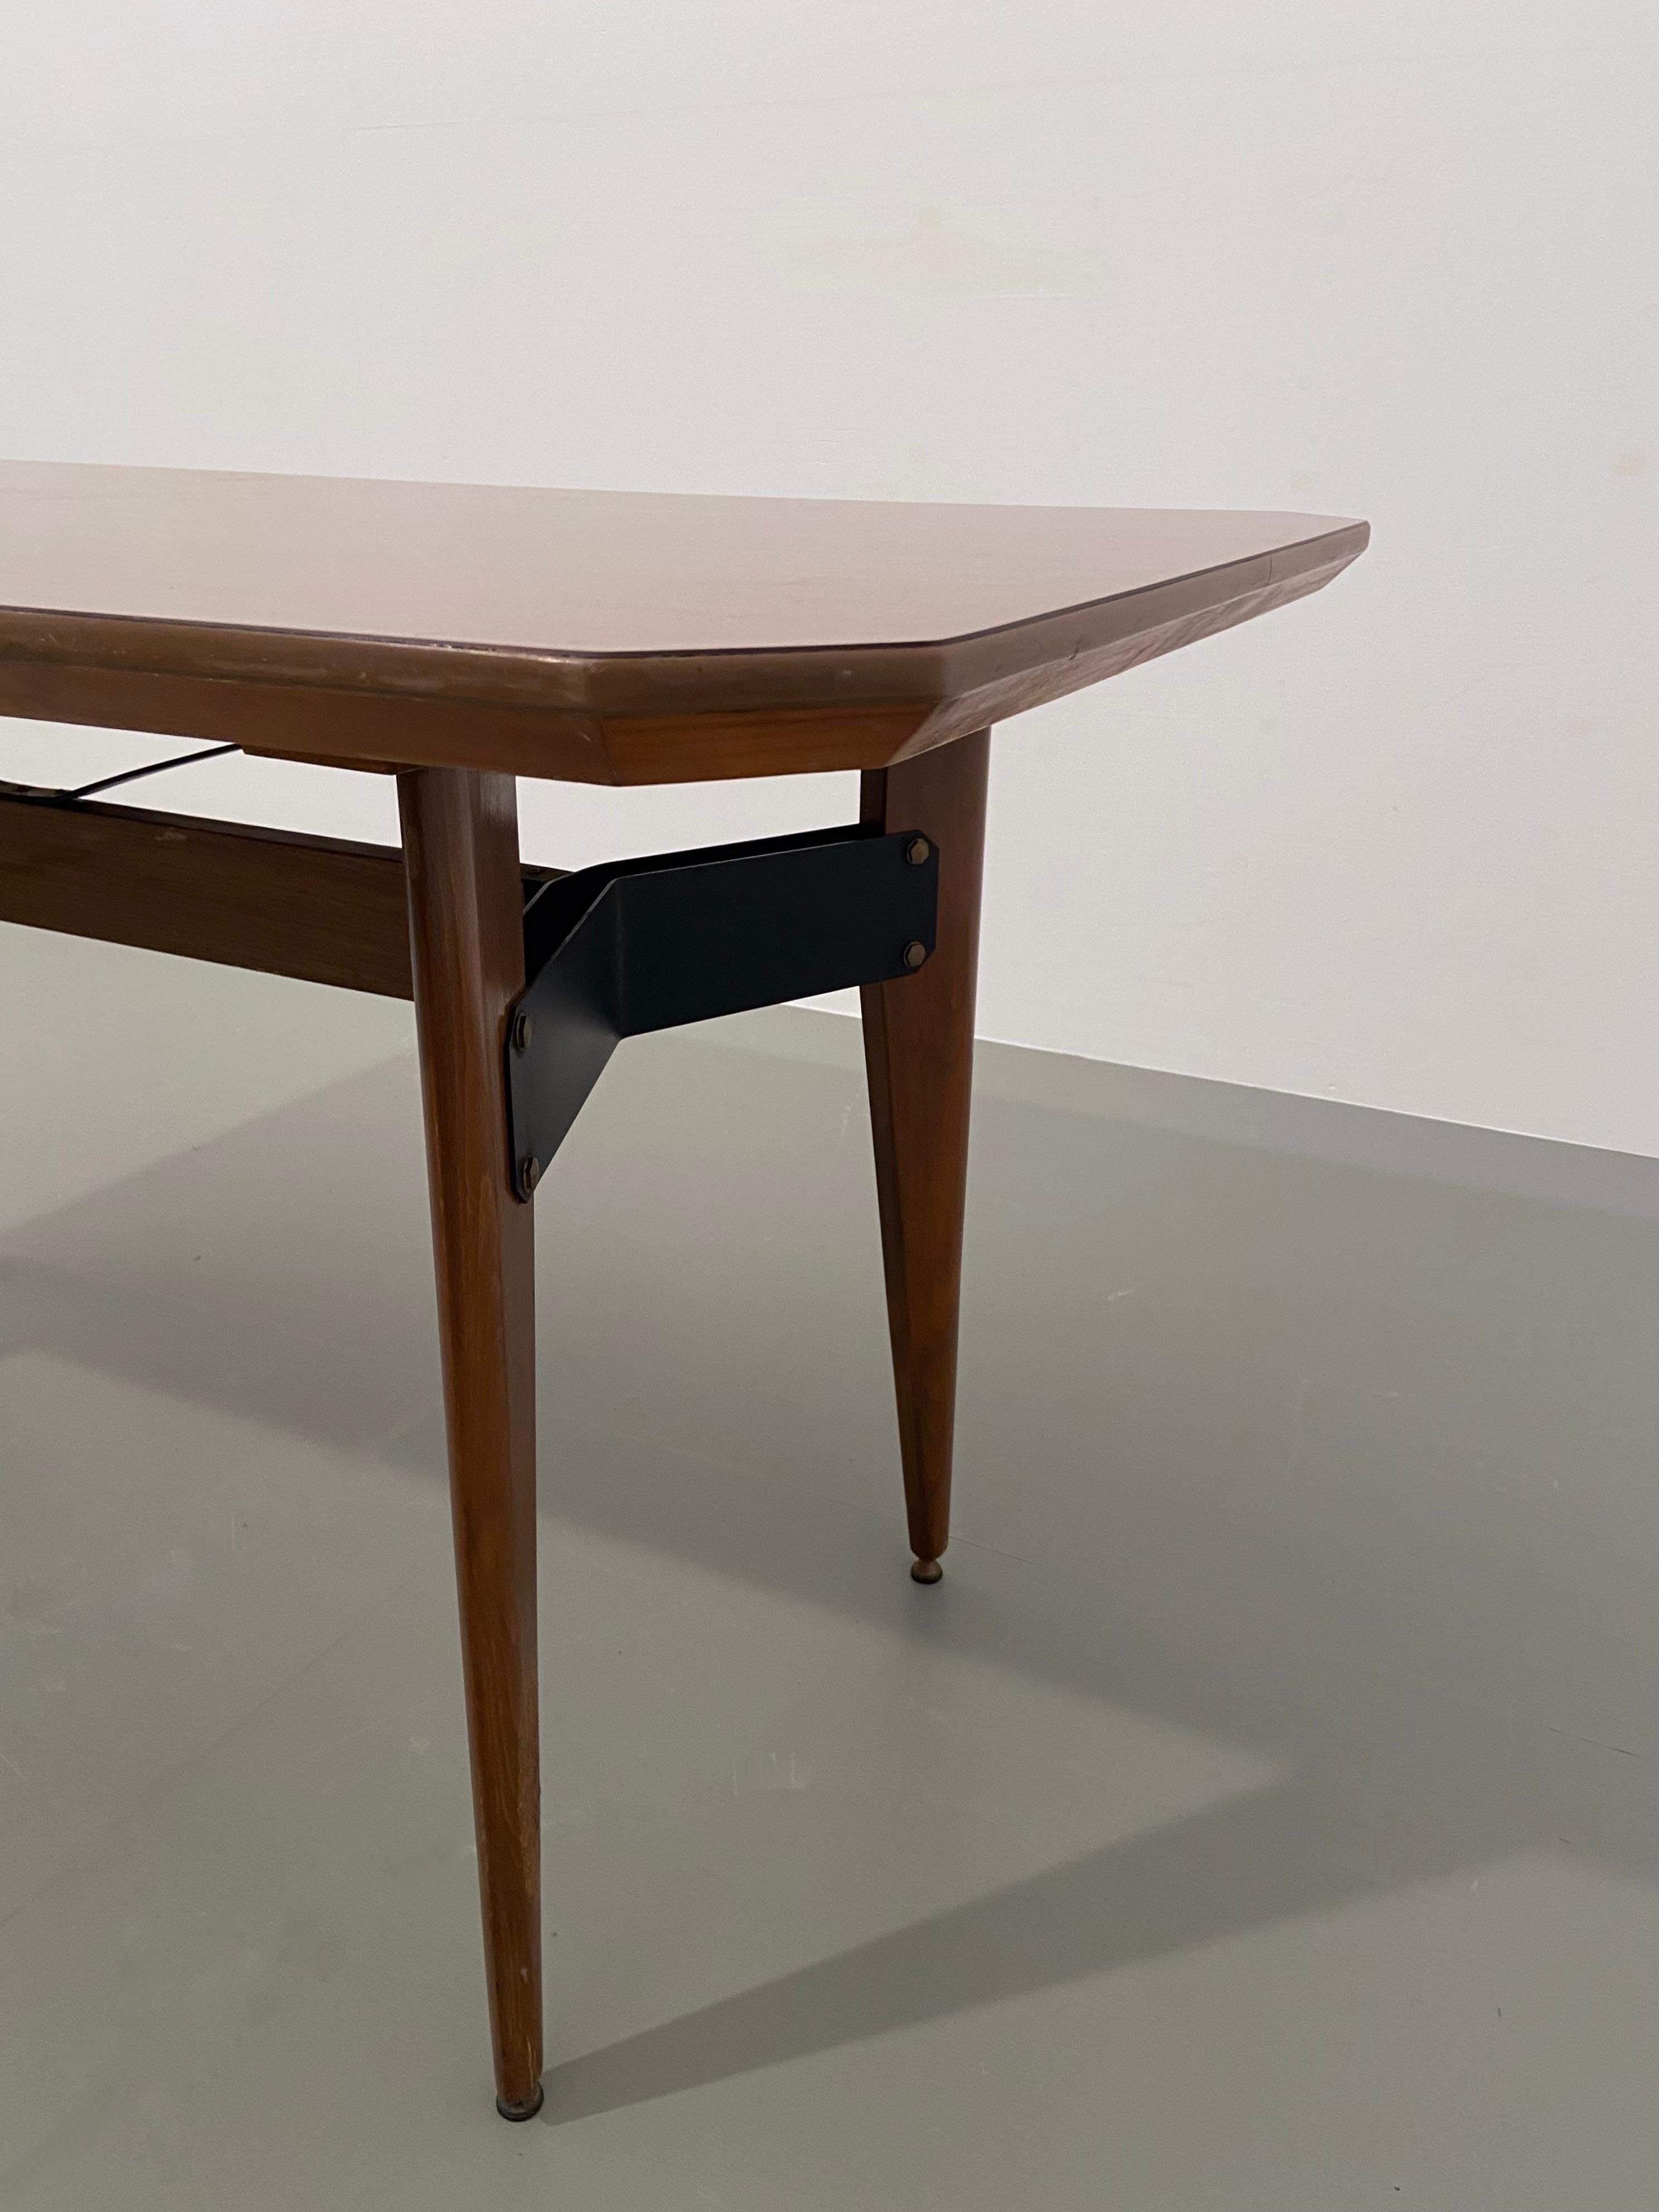 Carlo Ratti Dining Table in Wood and Metal, Italy, 1960's In Good Condition For Sale In Amsterdam, NL